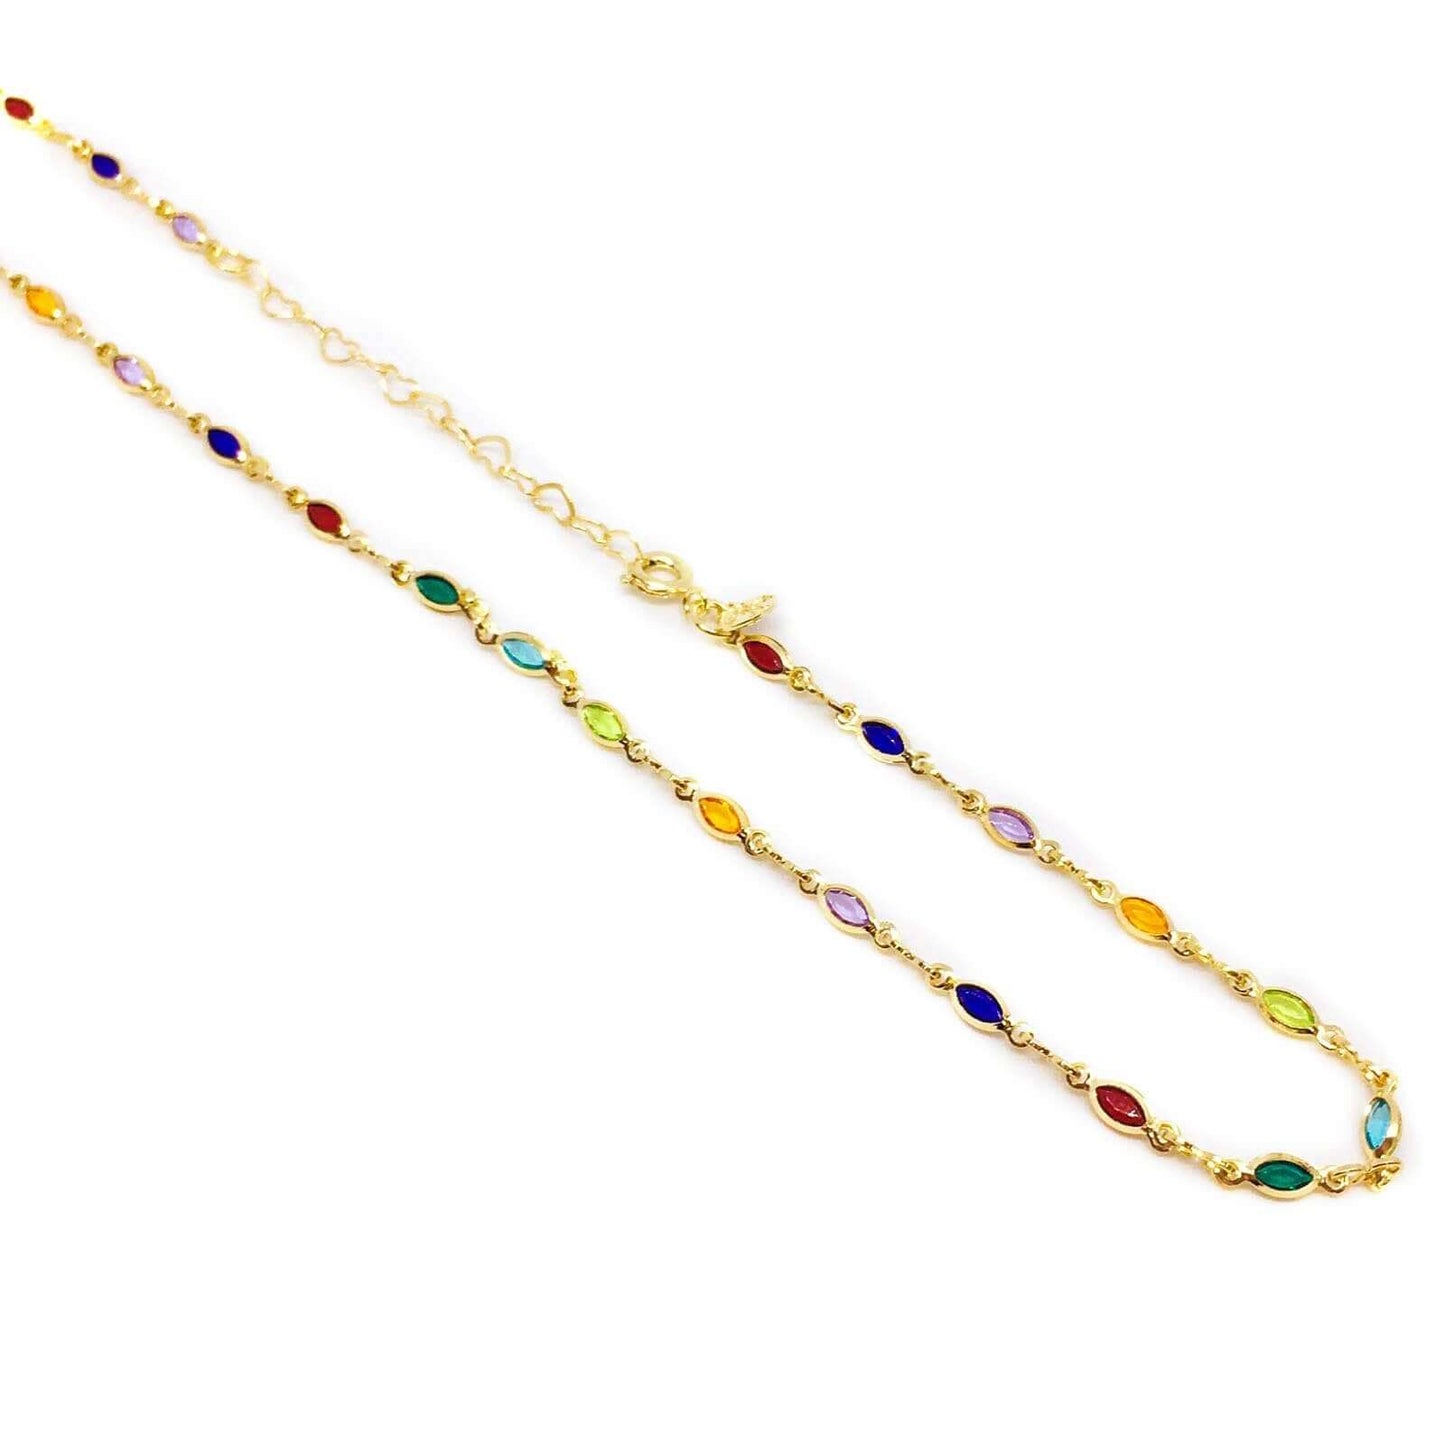 GoldFi 18k Gold Filled Multicolor Flower Pendant and Necklace